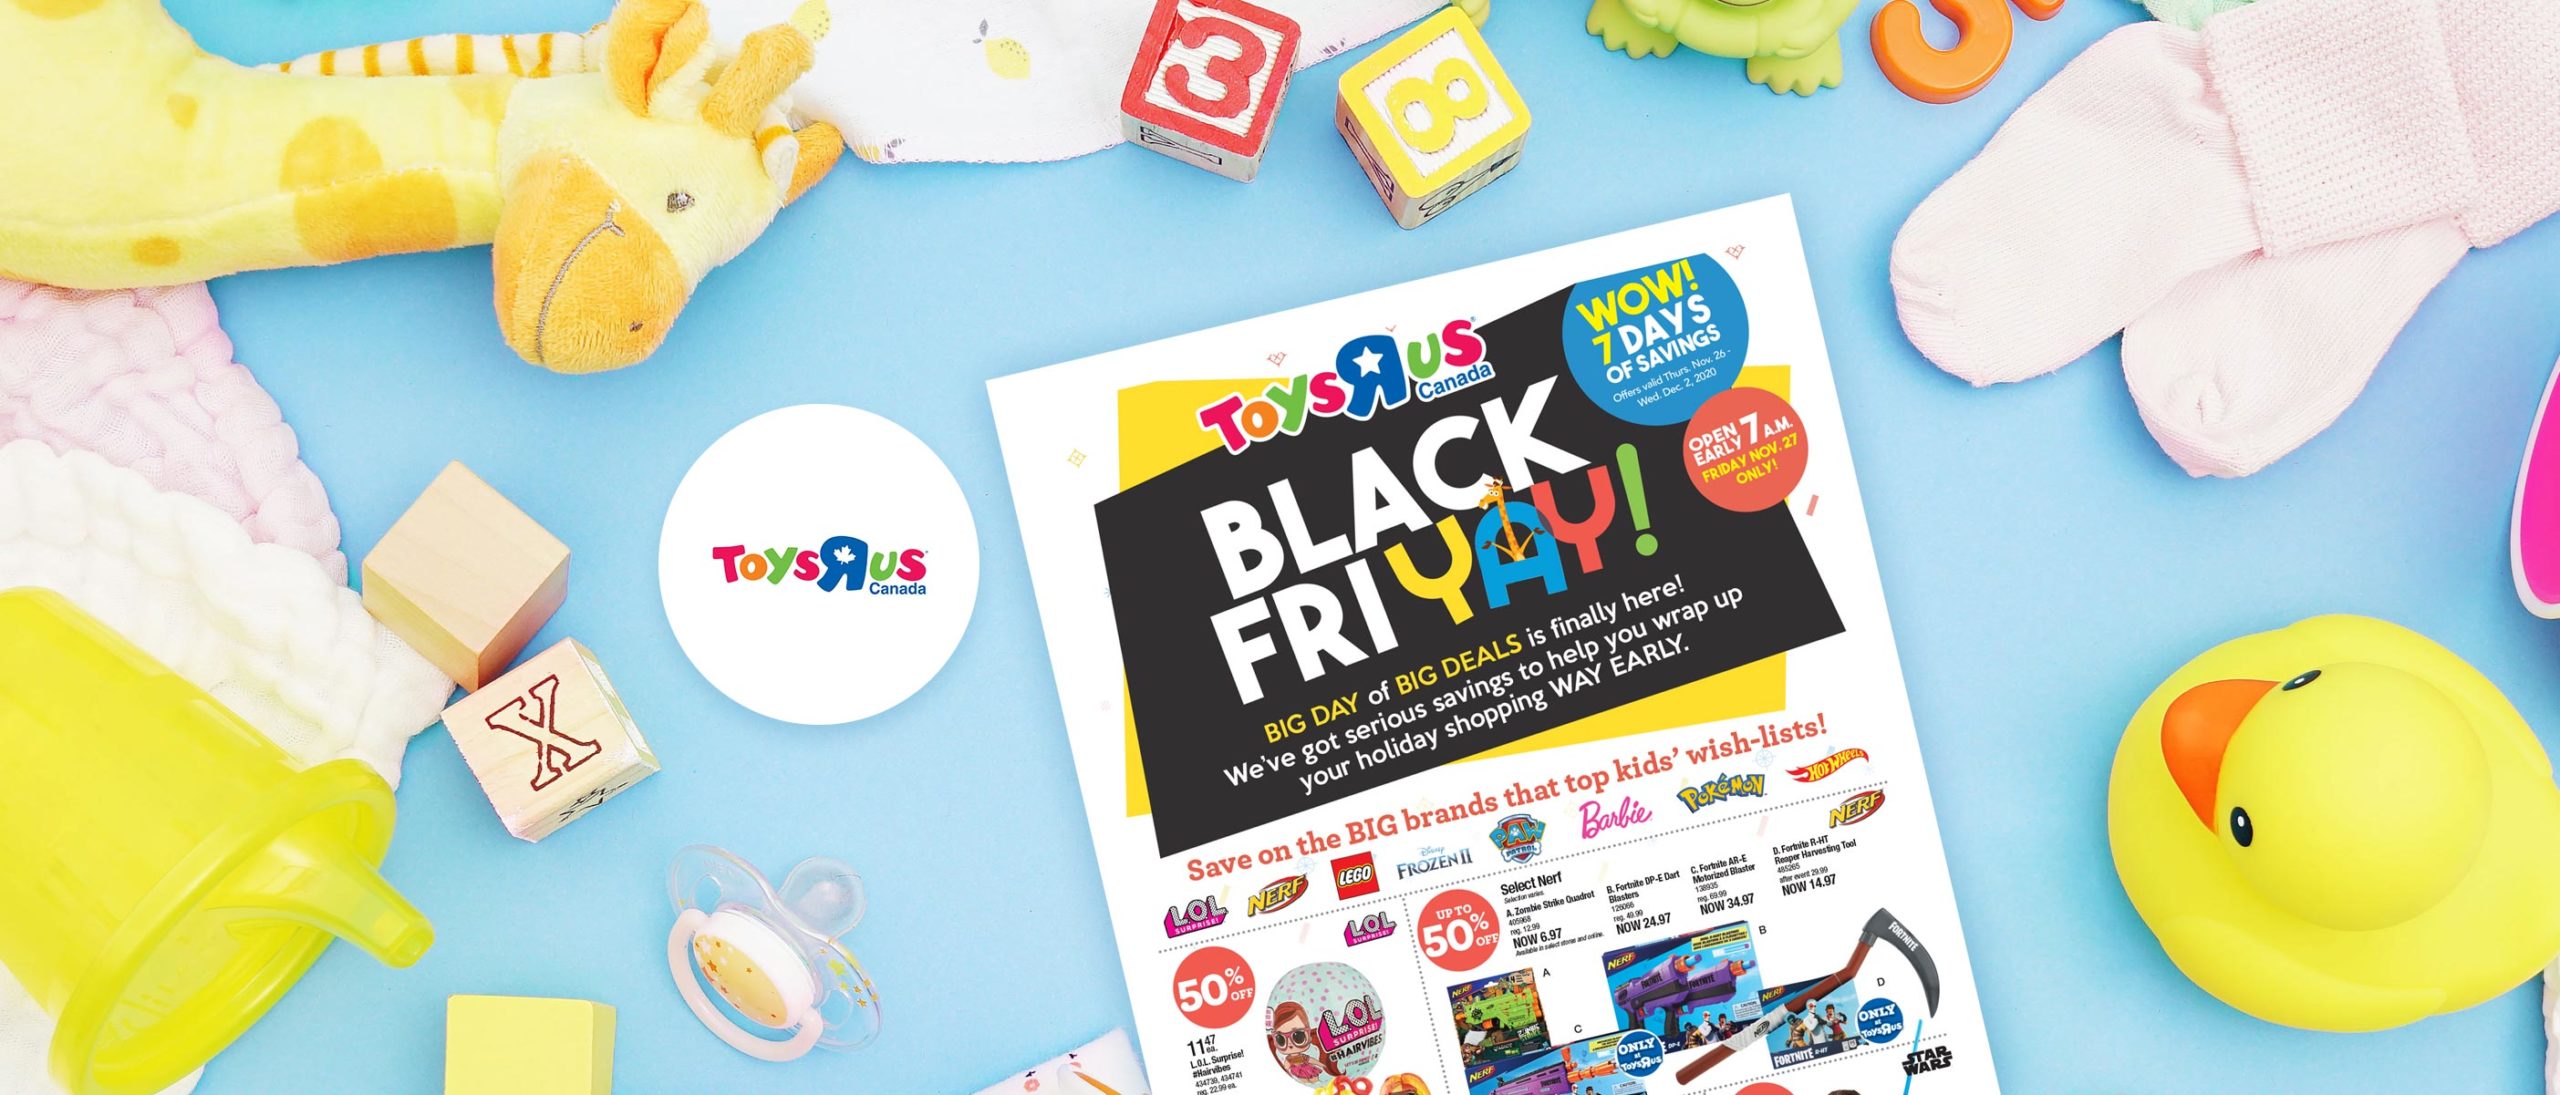 Toys “R” Us Black Friyay Deals are Here!